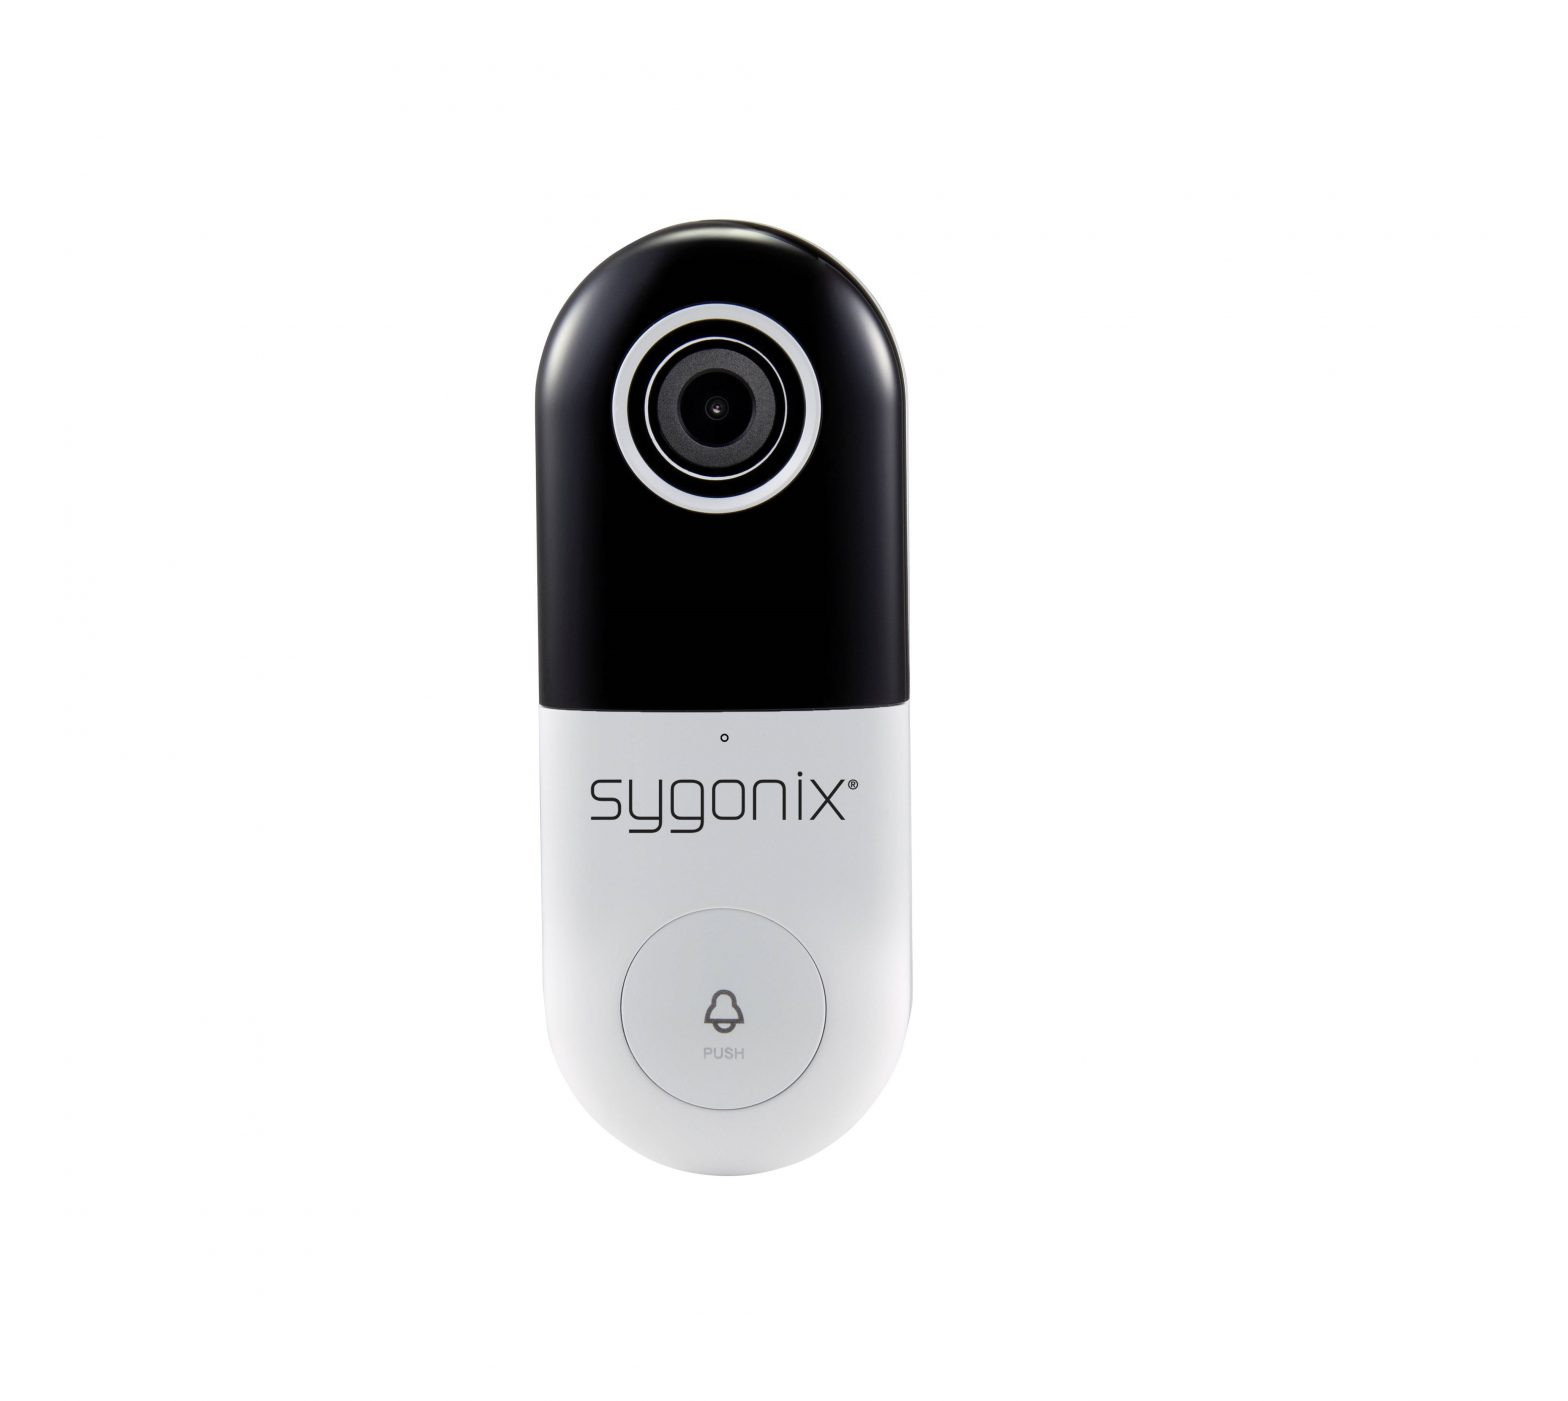 Sygonix Wi-Fi Doorbell with camera Instruction Manual